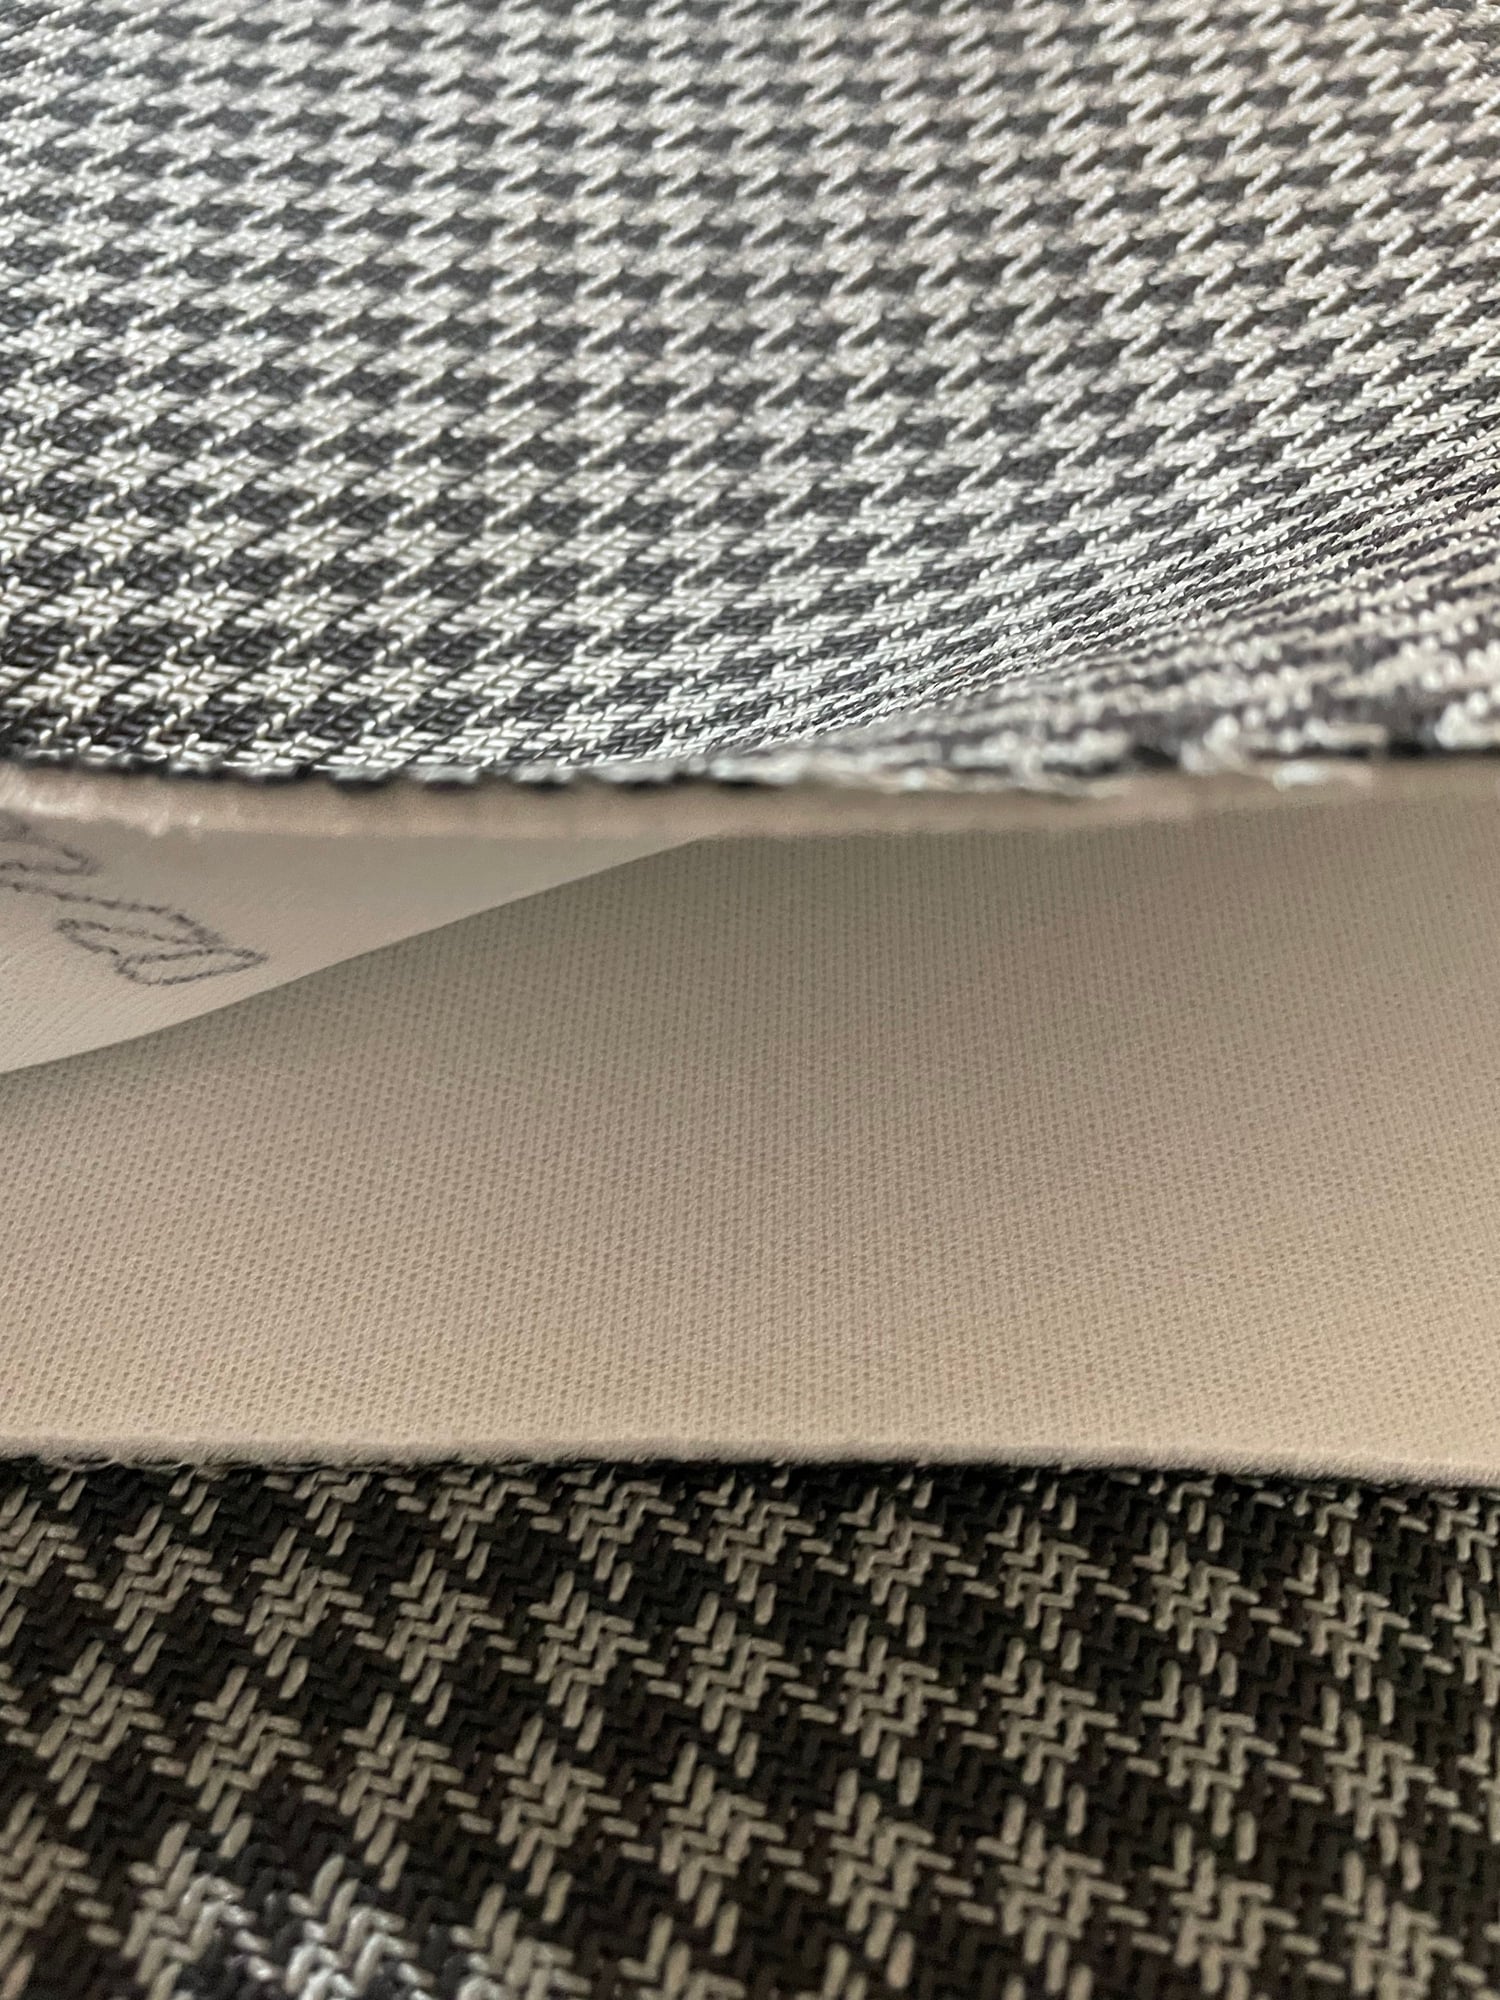 Interior/Upholstery - 911r / Sport Classic OEM Houndstooth / Pepita Fabric - New - 0  All Models - Fairhope, AL 36607, United States